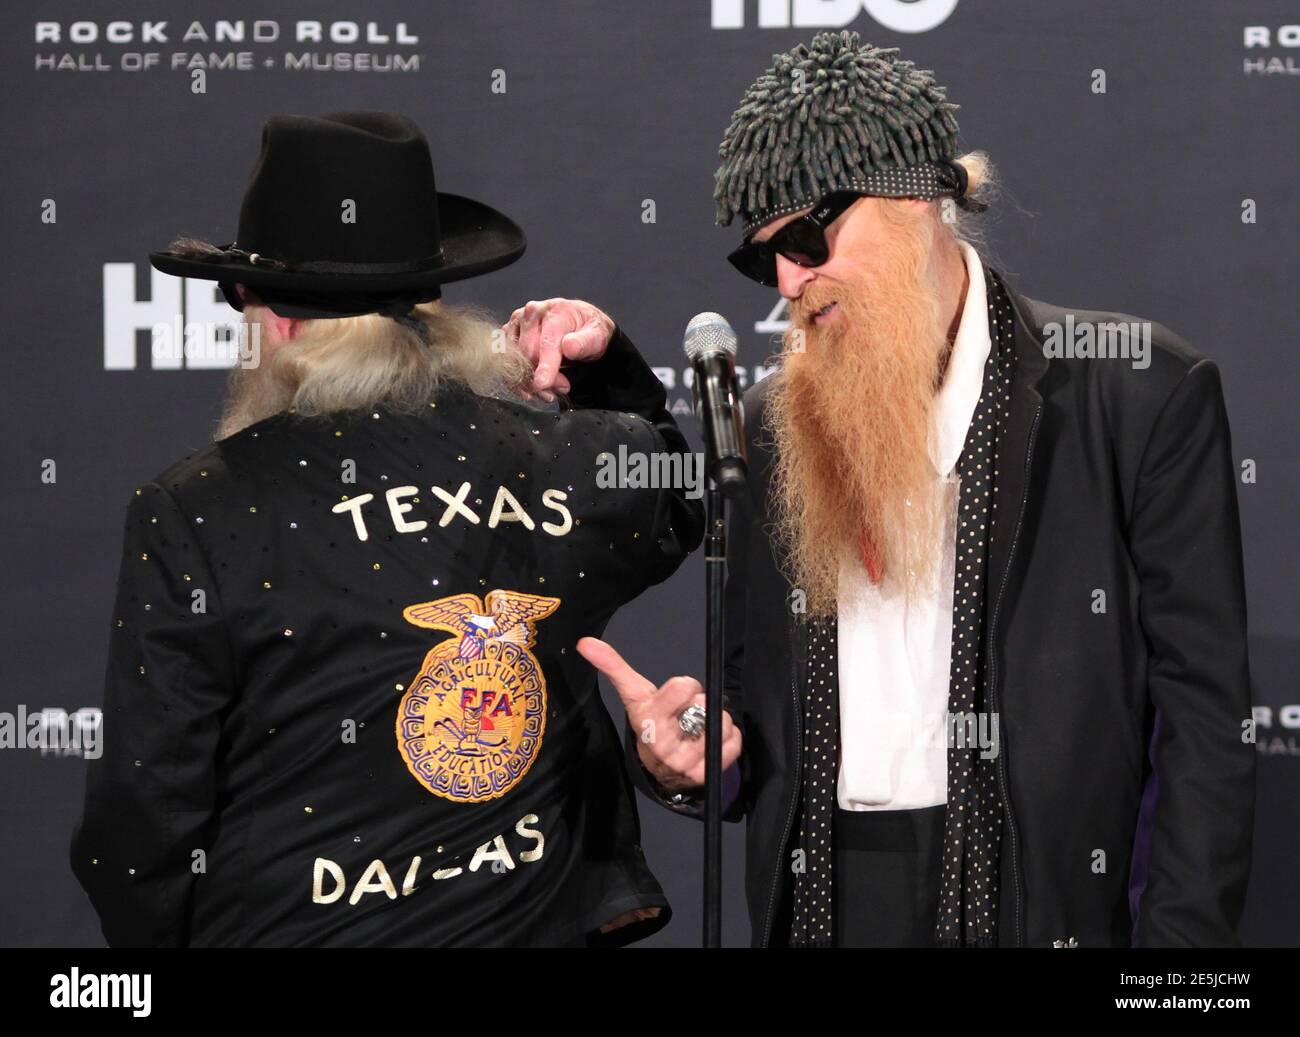 Billy Gibbons (R) of ZZ Top and bandmate Dusty Hill arrive for the 2012  Rock n' Roll Hall of Fame induction ceremony in Cleveland, Ohio April 14,  2012. REUTERS/Aaron Josefczyk (UNITED STATES -